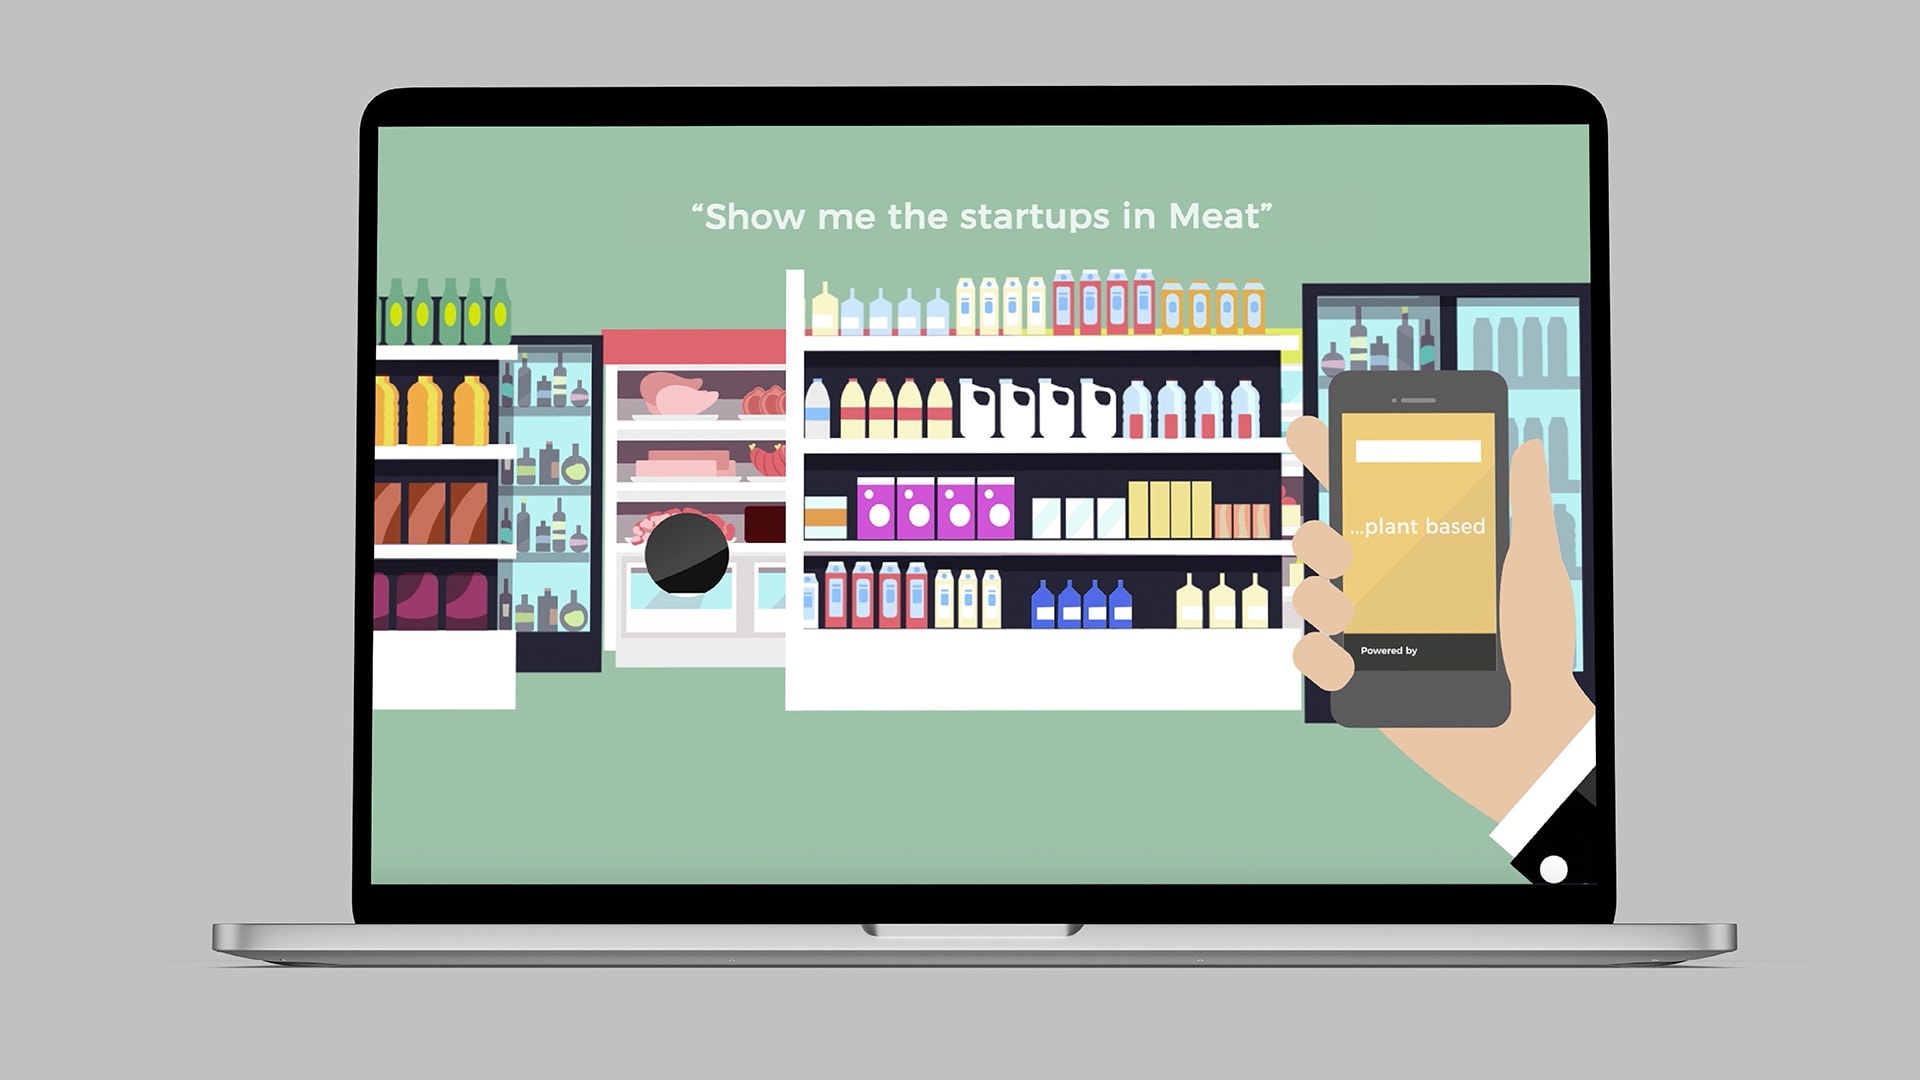 A laptop displaying the C-suite Pitch Pilot Brand Video Illustration showing a hand holding a mobile phone in a Supermarket with food and drinks on shelves.